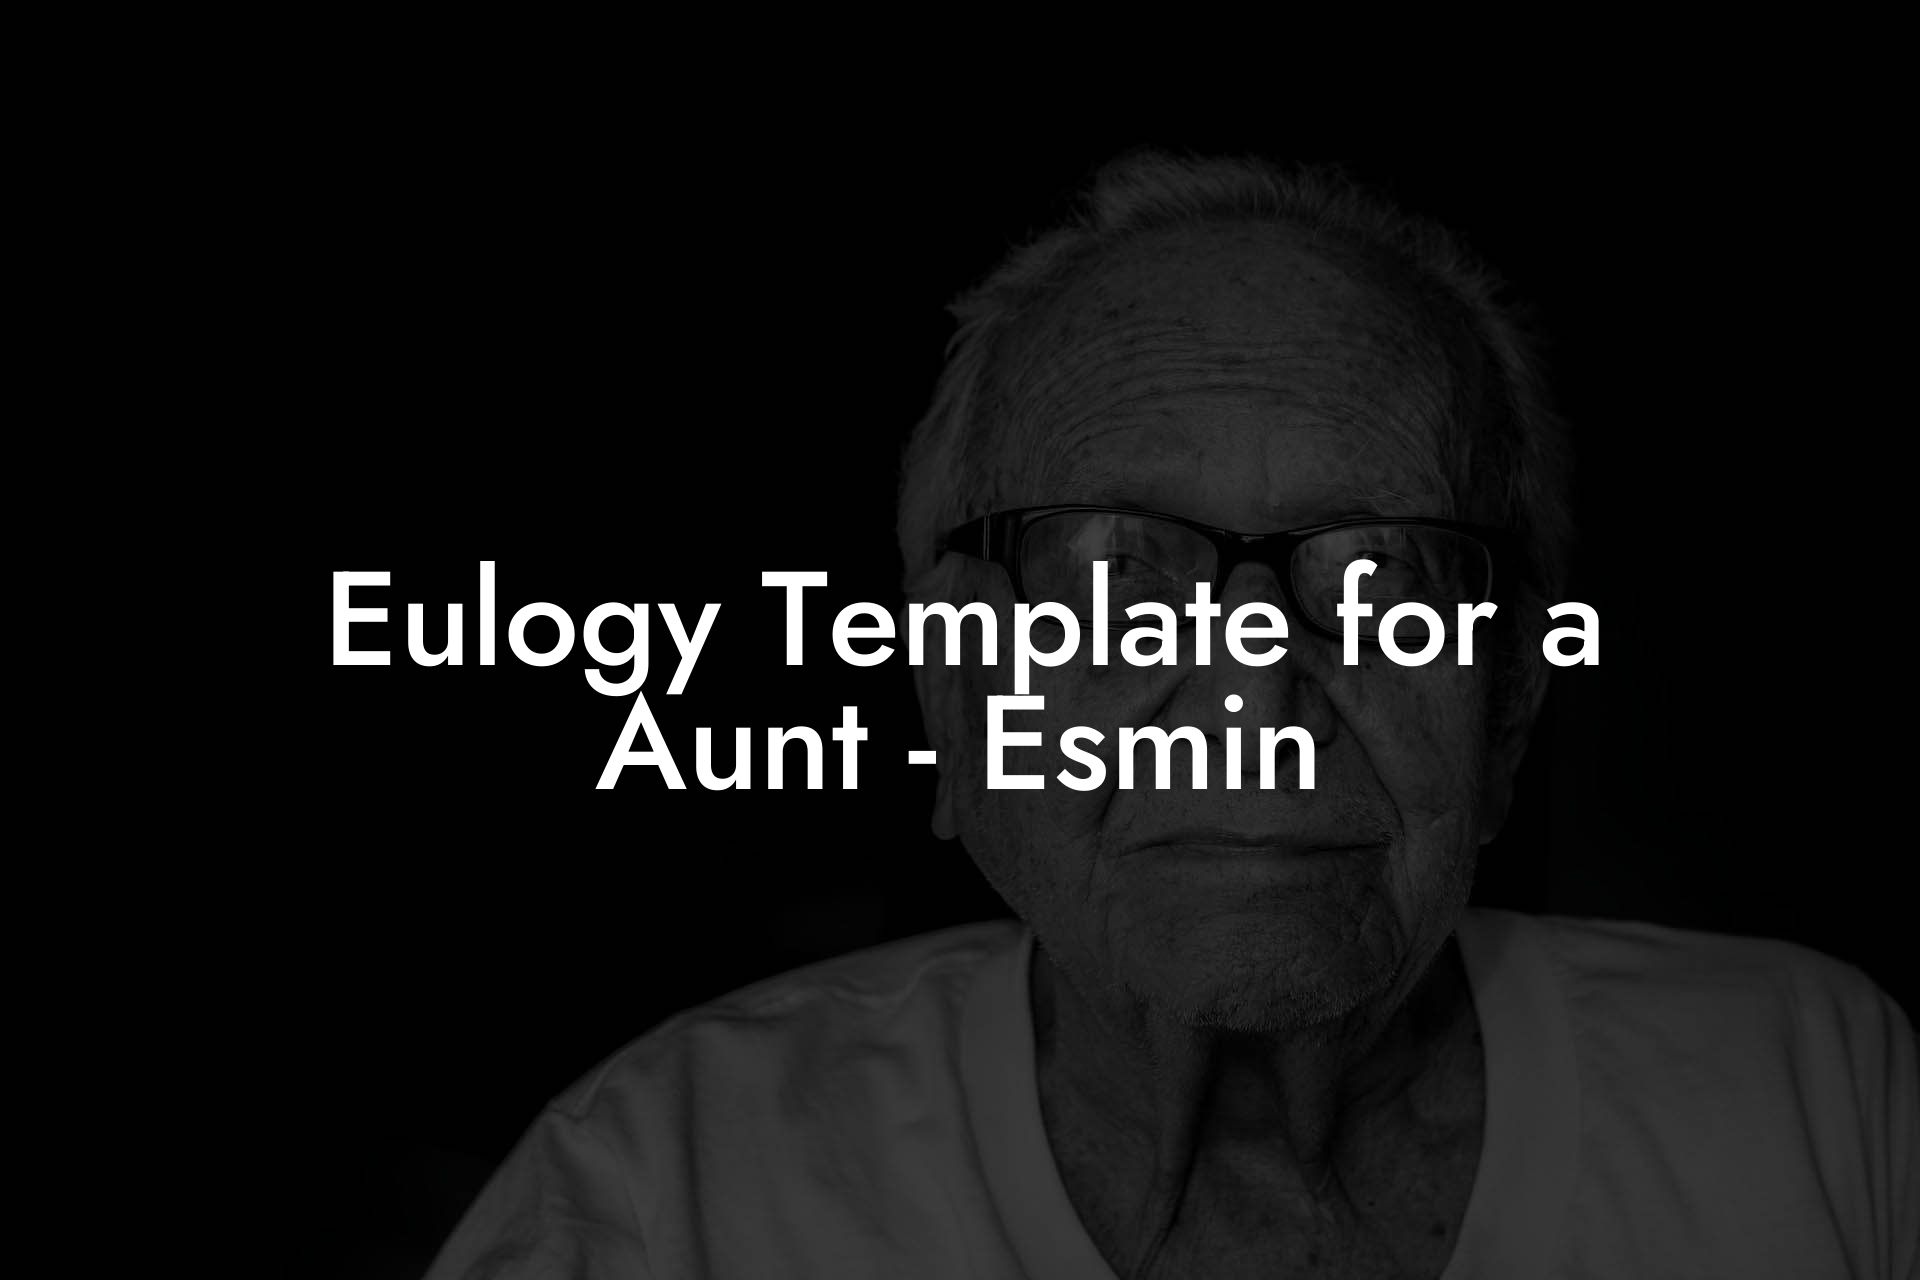 eulogy-template-for-a-aunt-esmin-eulogy-assistant